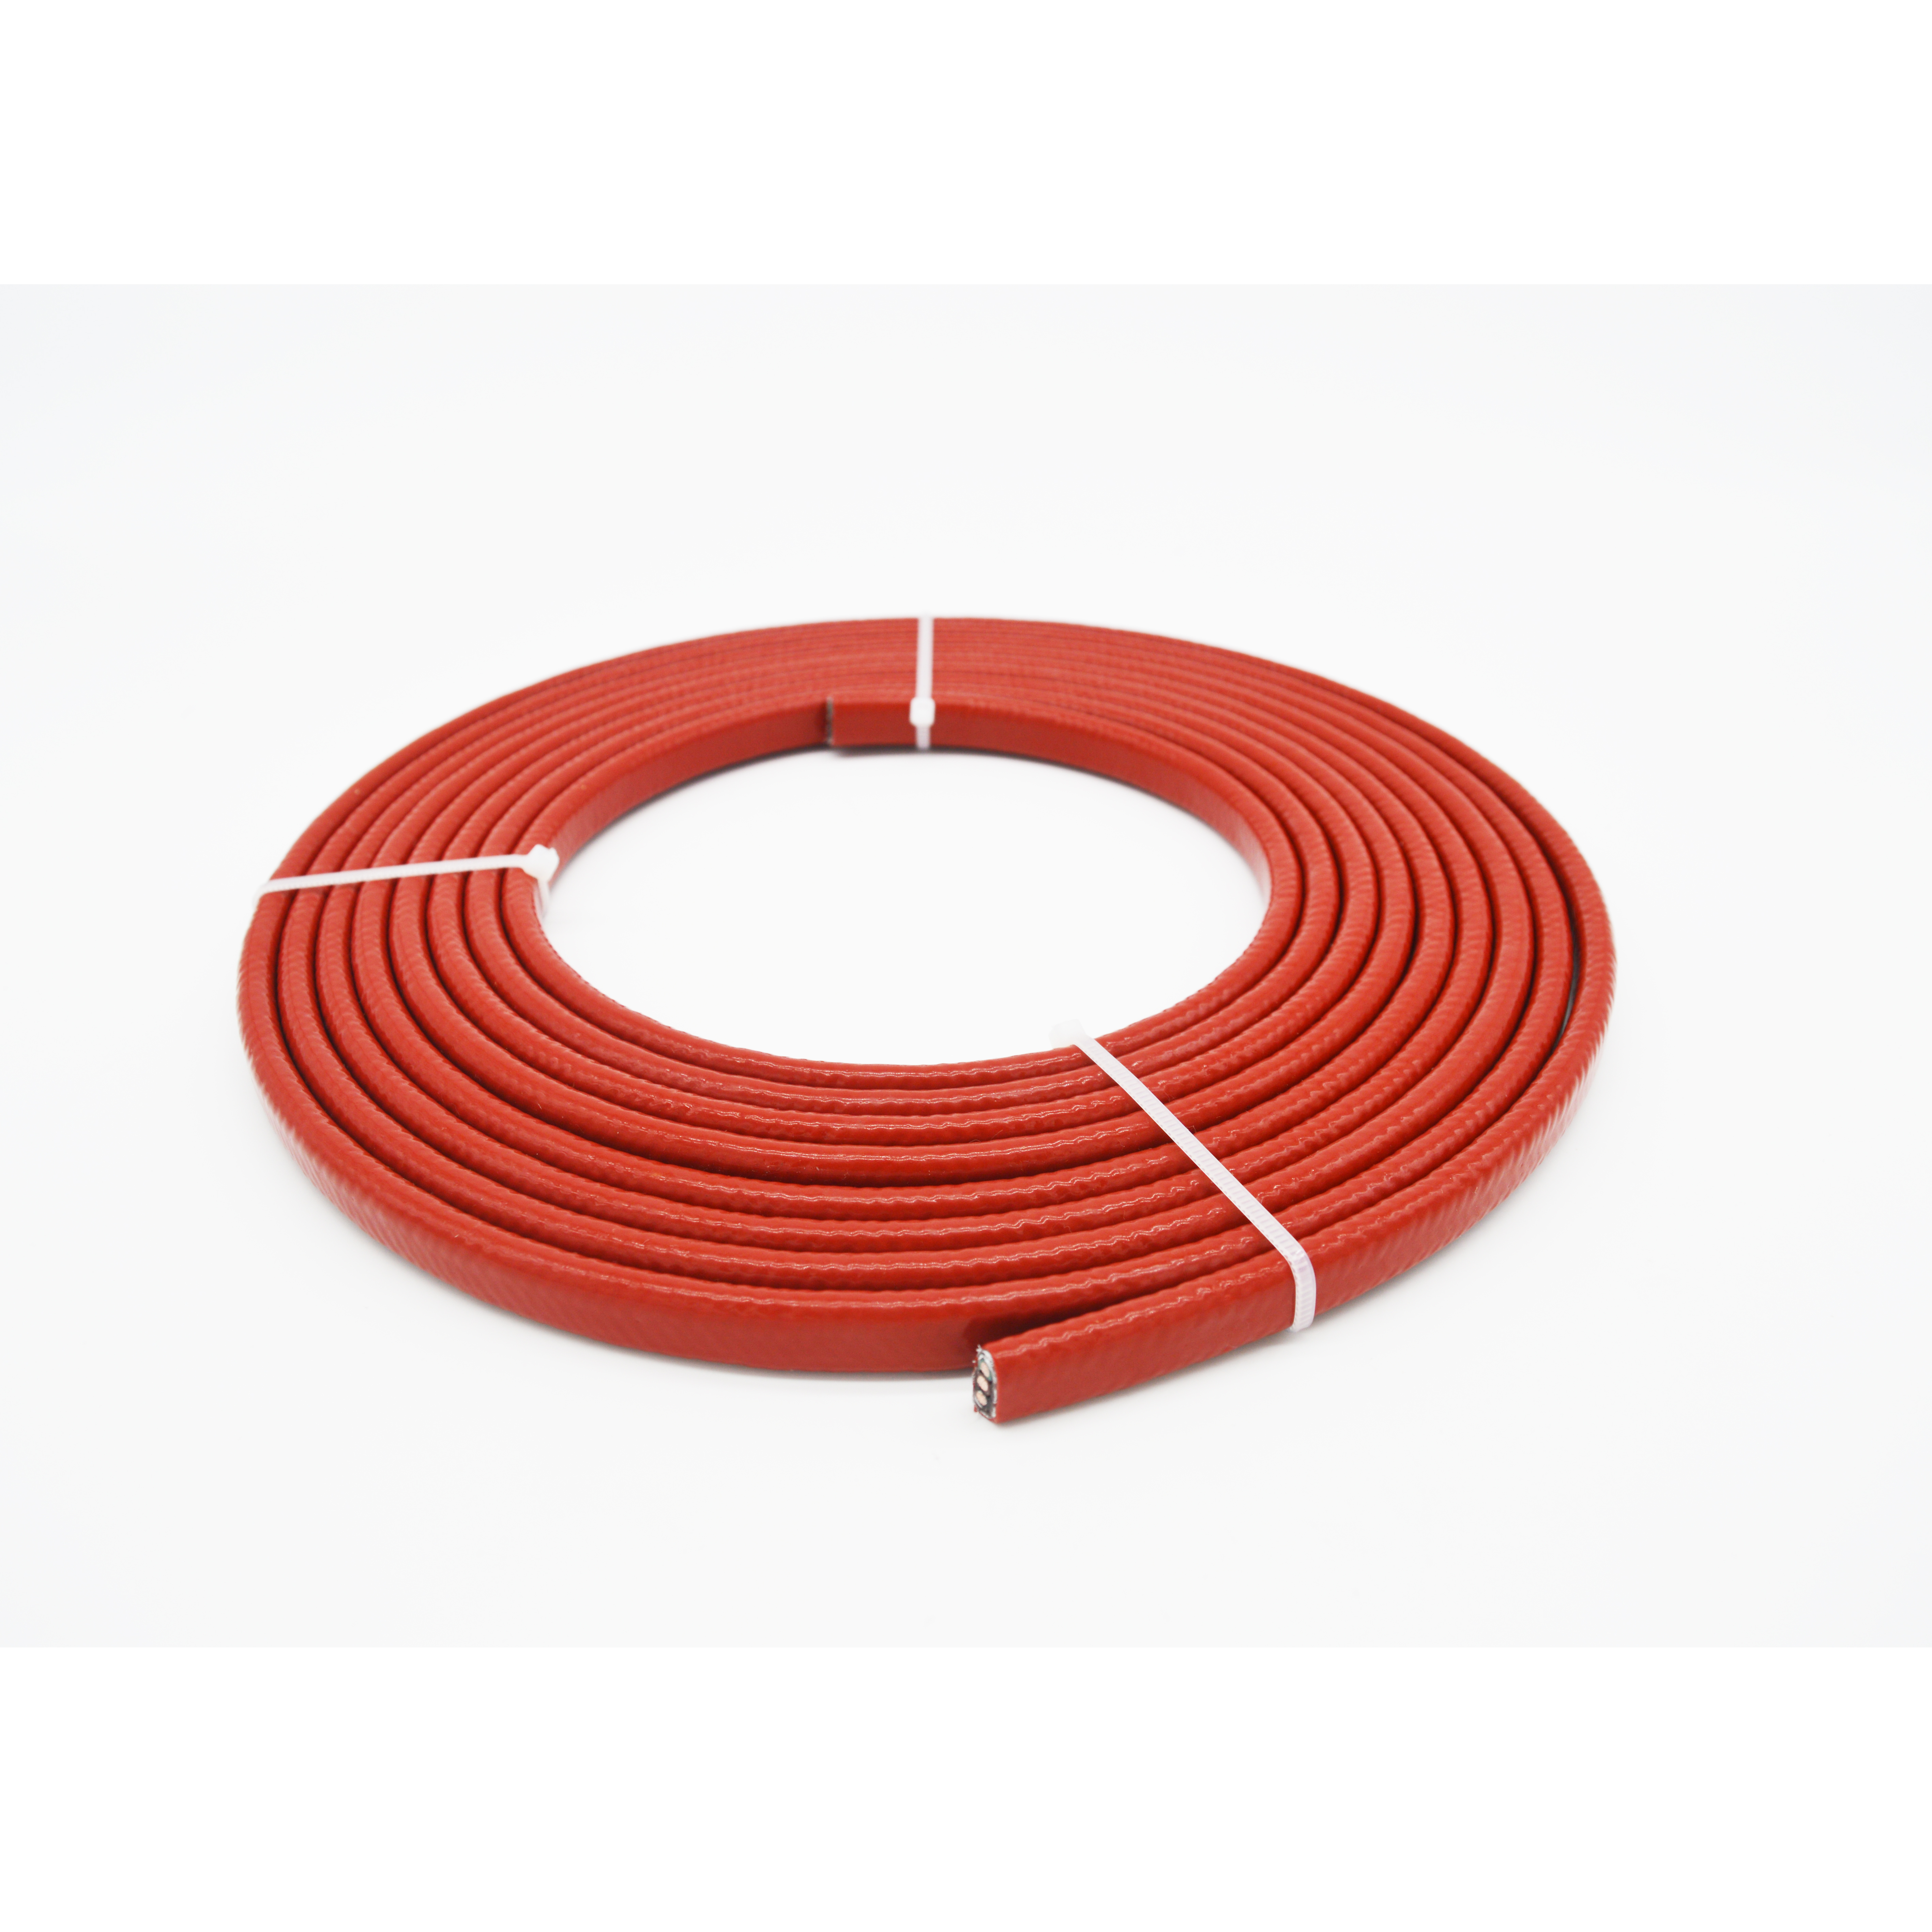 Constant wattage electric heat tape heating cable, accompanied by the high efficiency of the heat